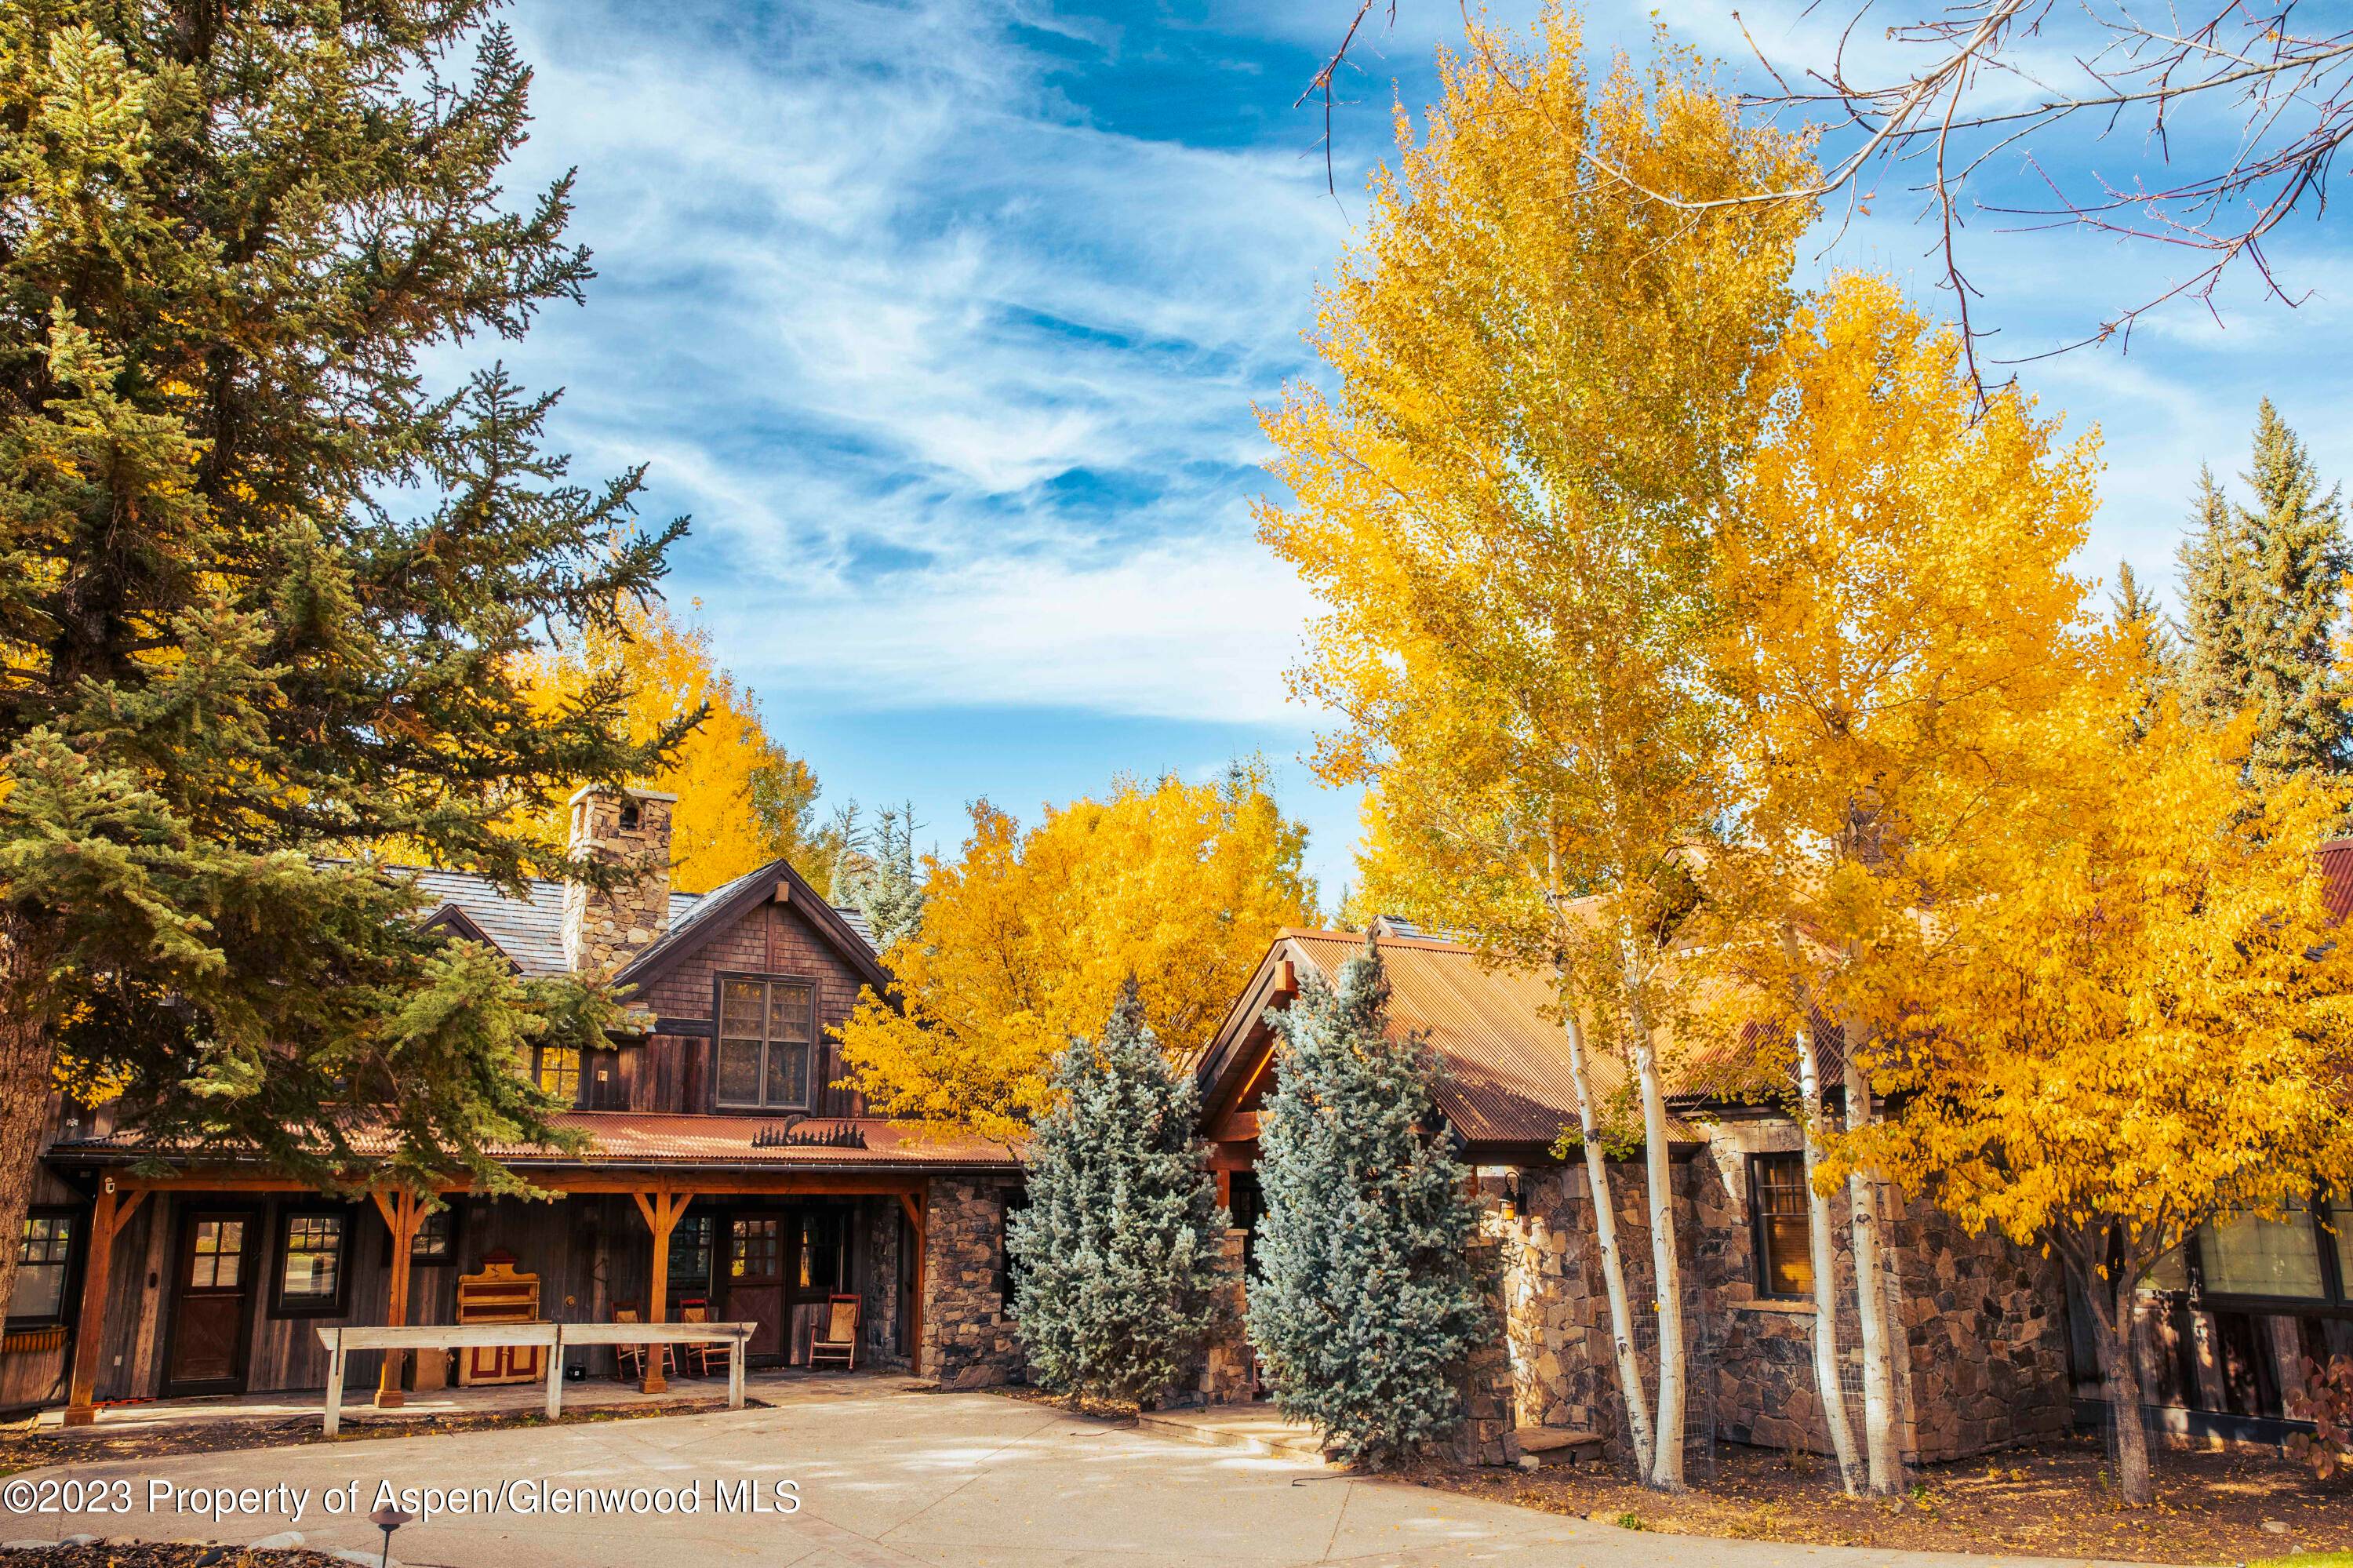 An incredible oasis awaits at Twin Creeks Ranch in Snowmass, Colorado.